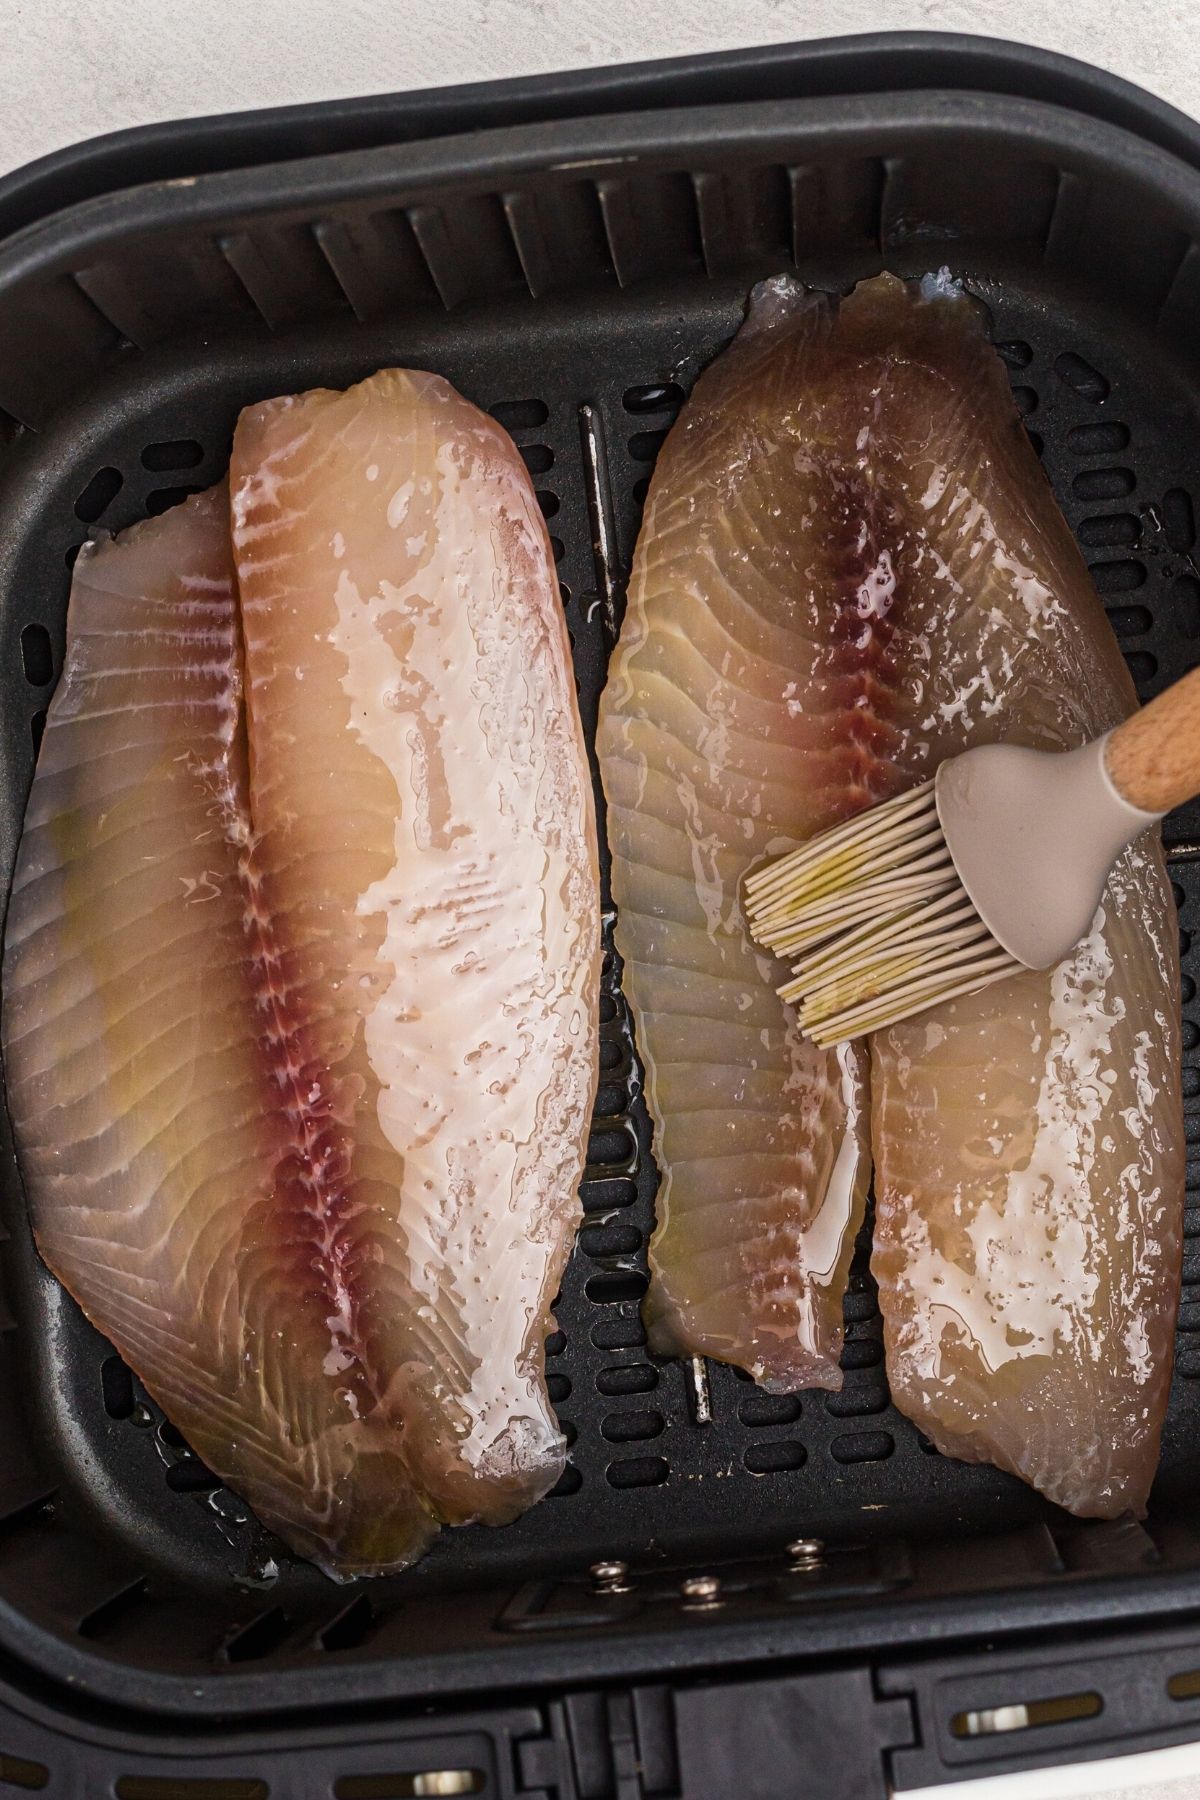 brushing oil onto fish filets before seasoning and cooking